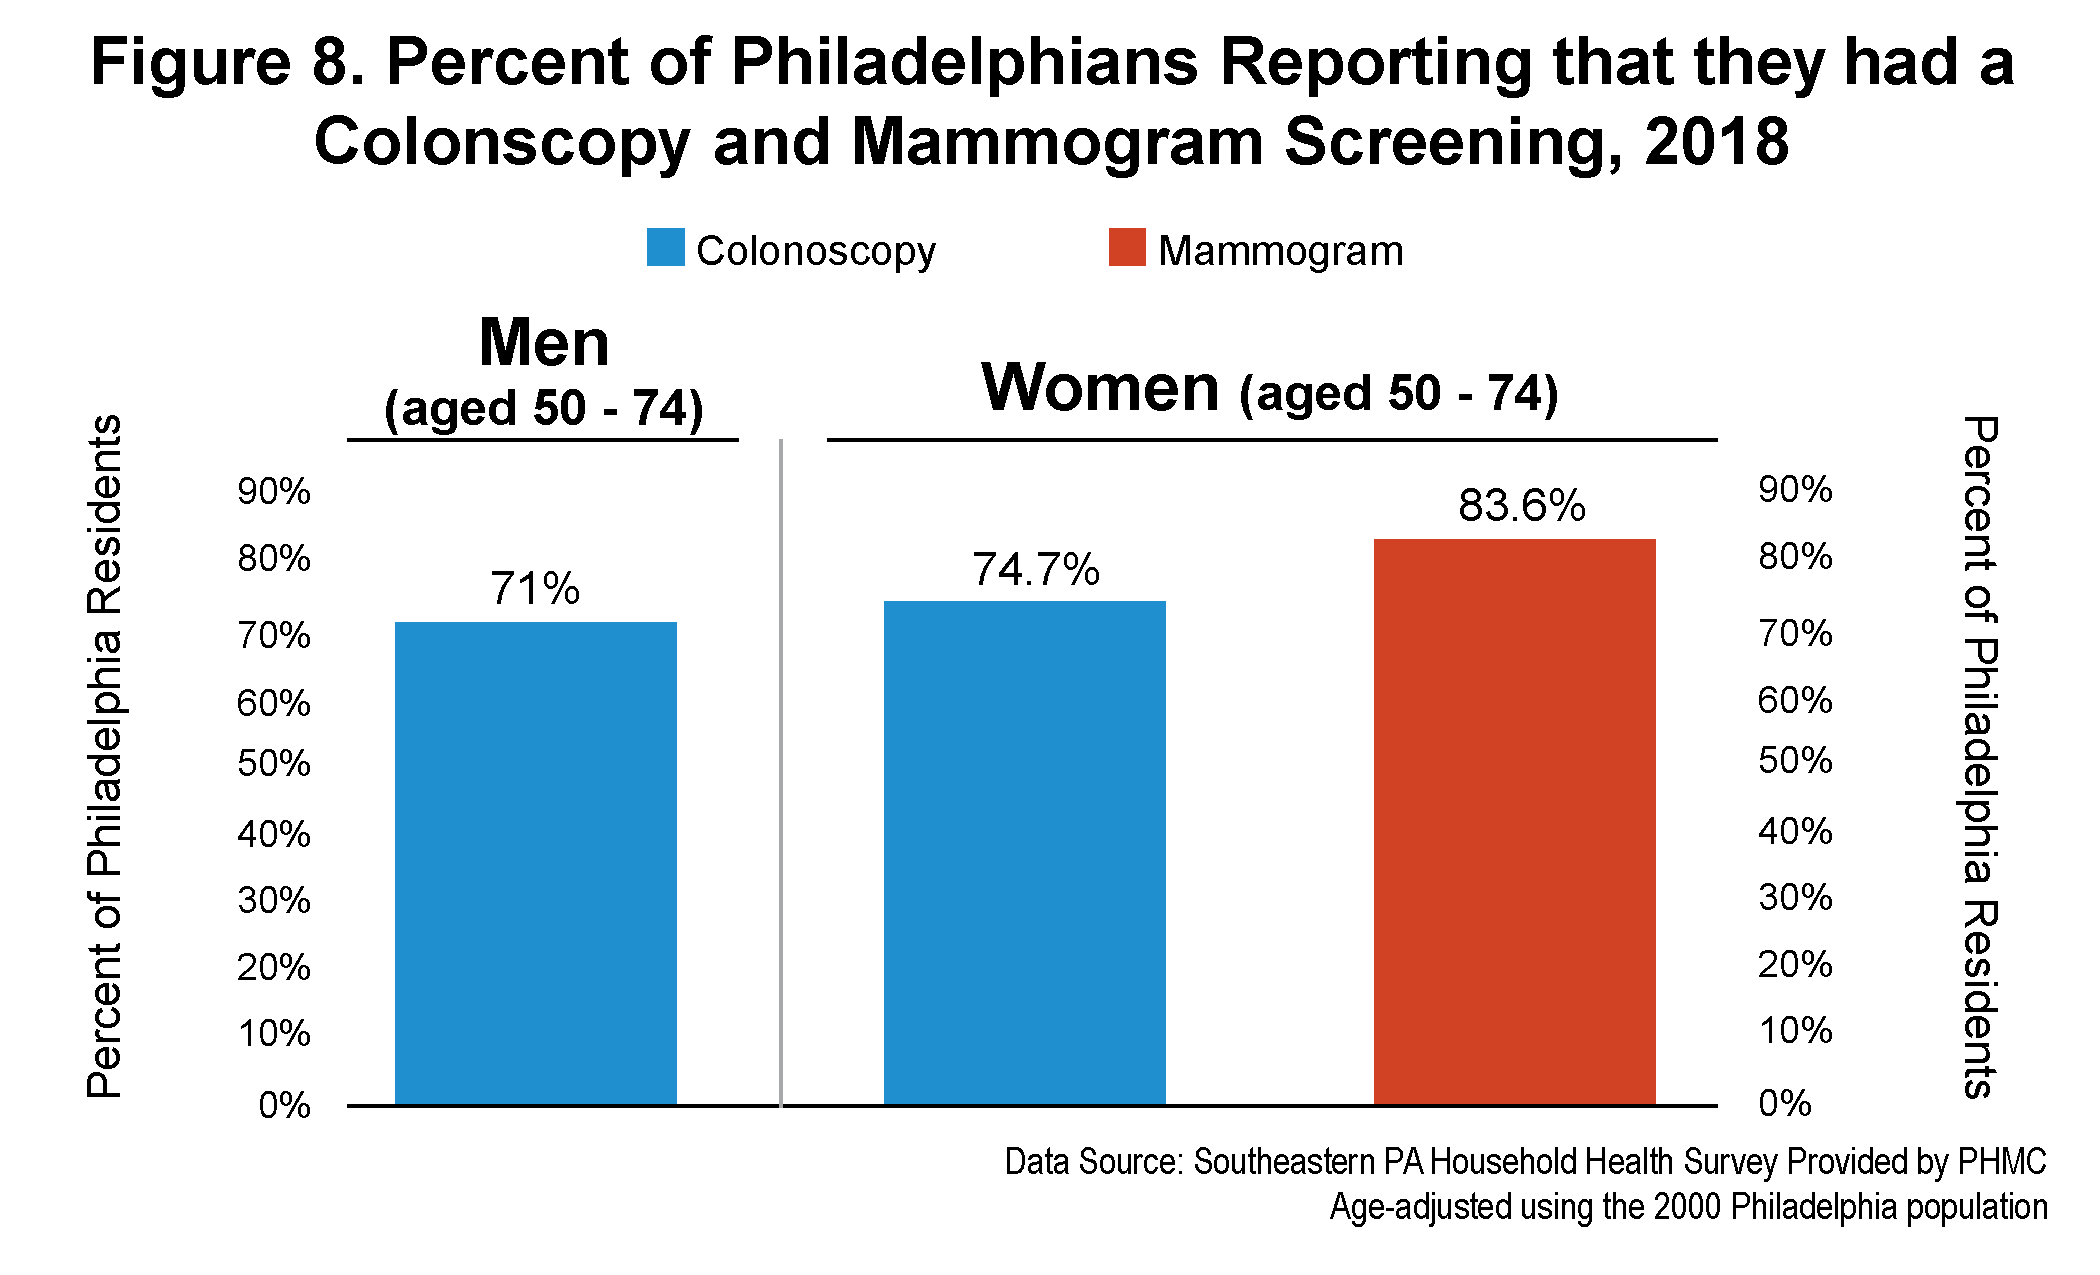 Figure 8. Percent of Philadelphians Reporting that they had a Colonscopy and Mammogram Screening, 2018